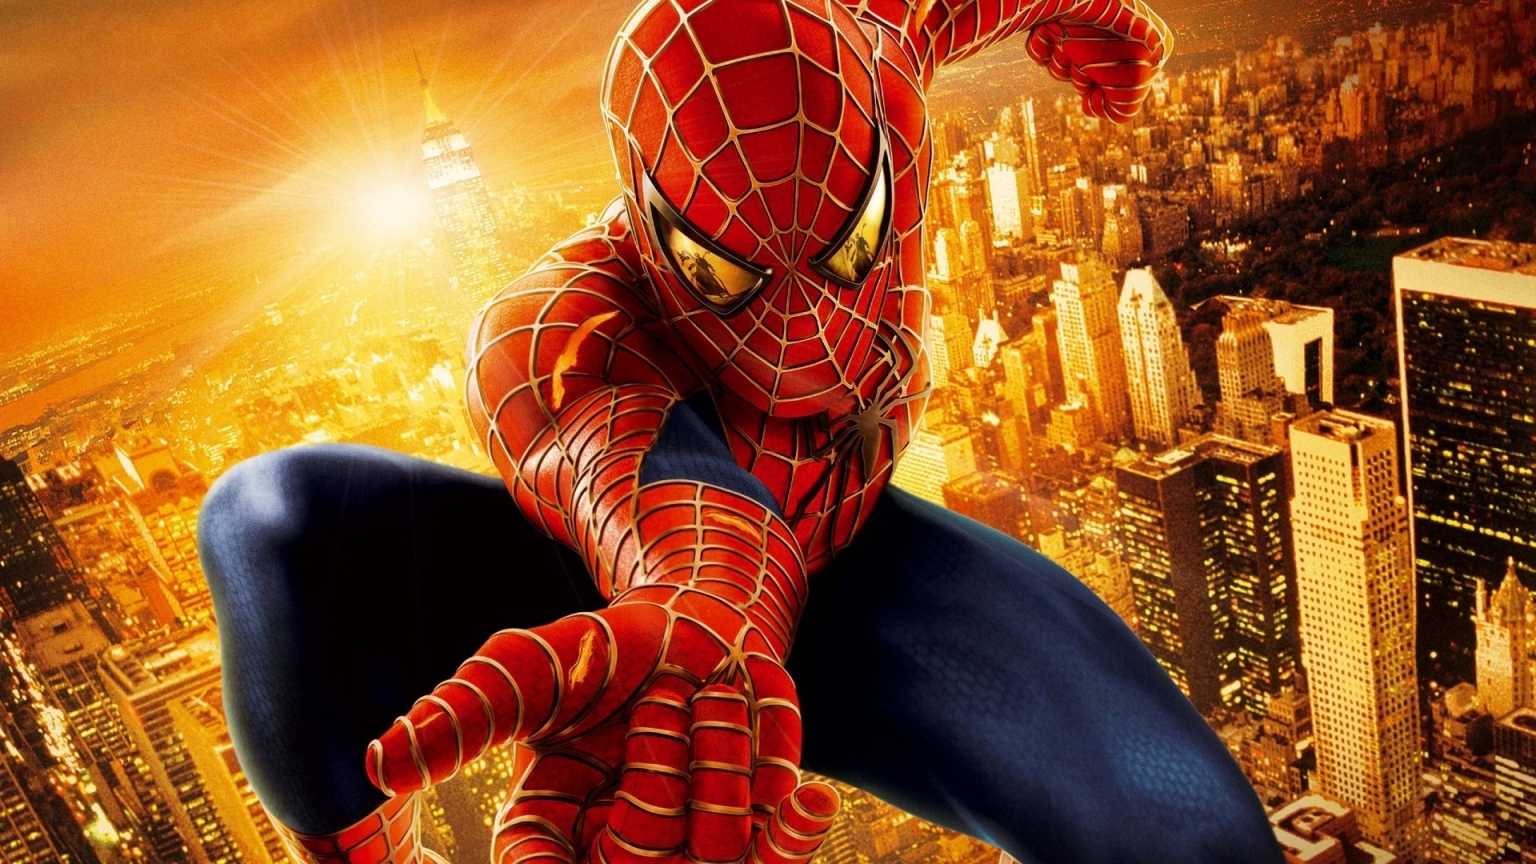 Spiderman Up for 1536 x 864 HDTV resolution